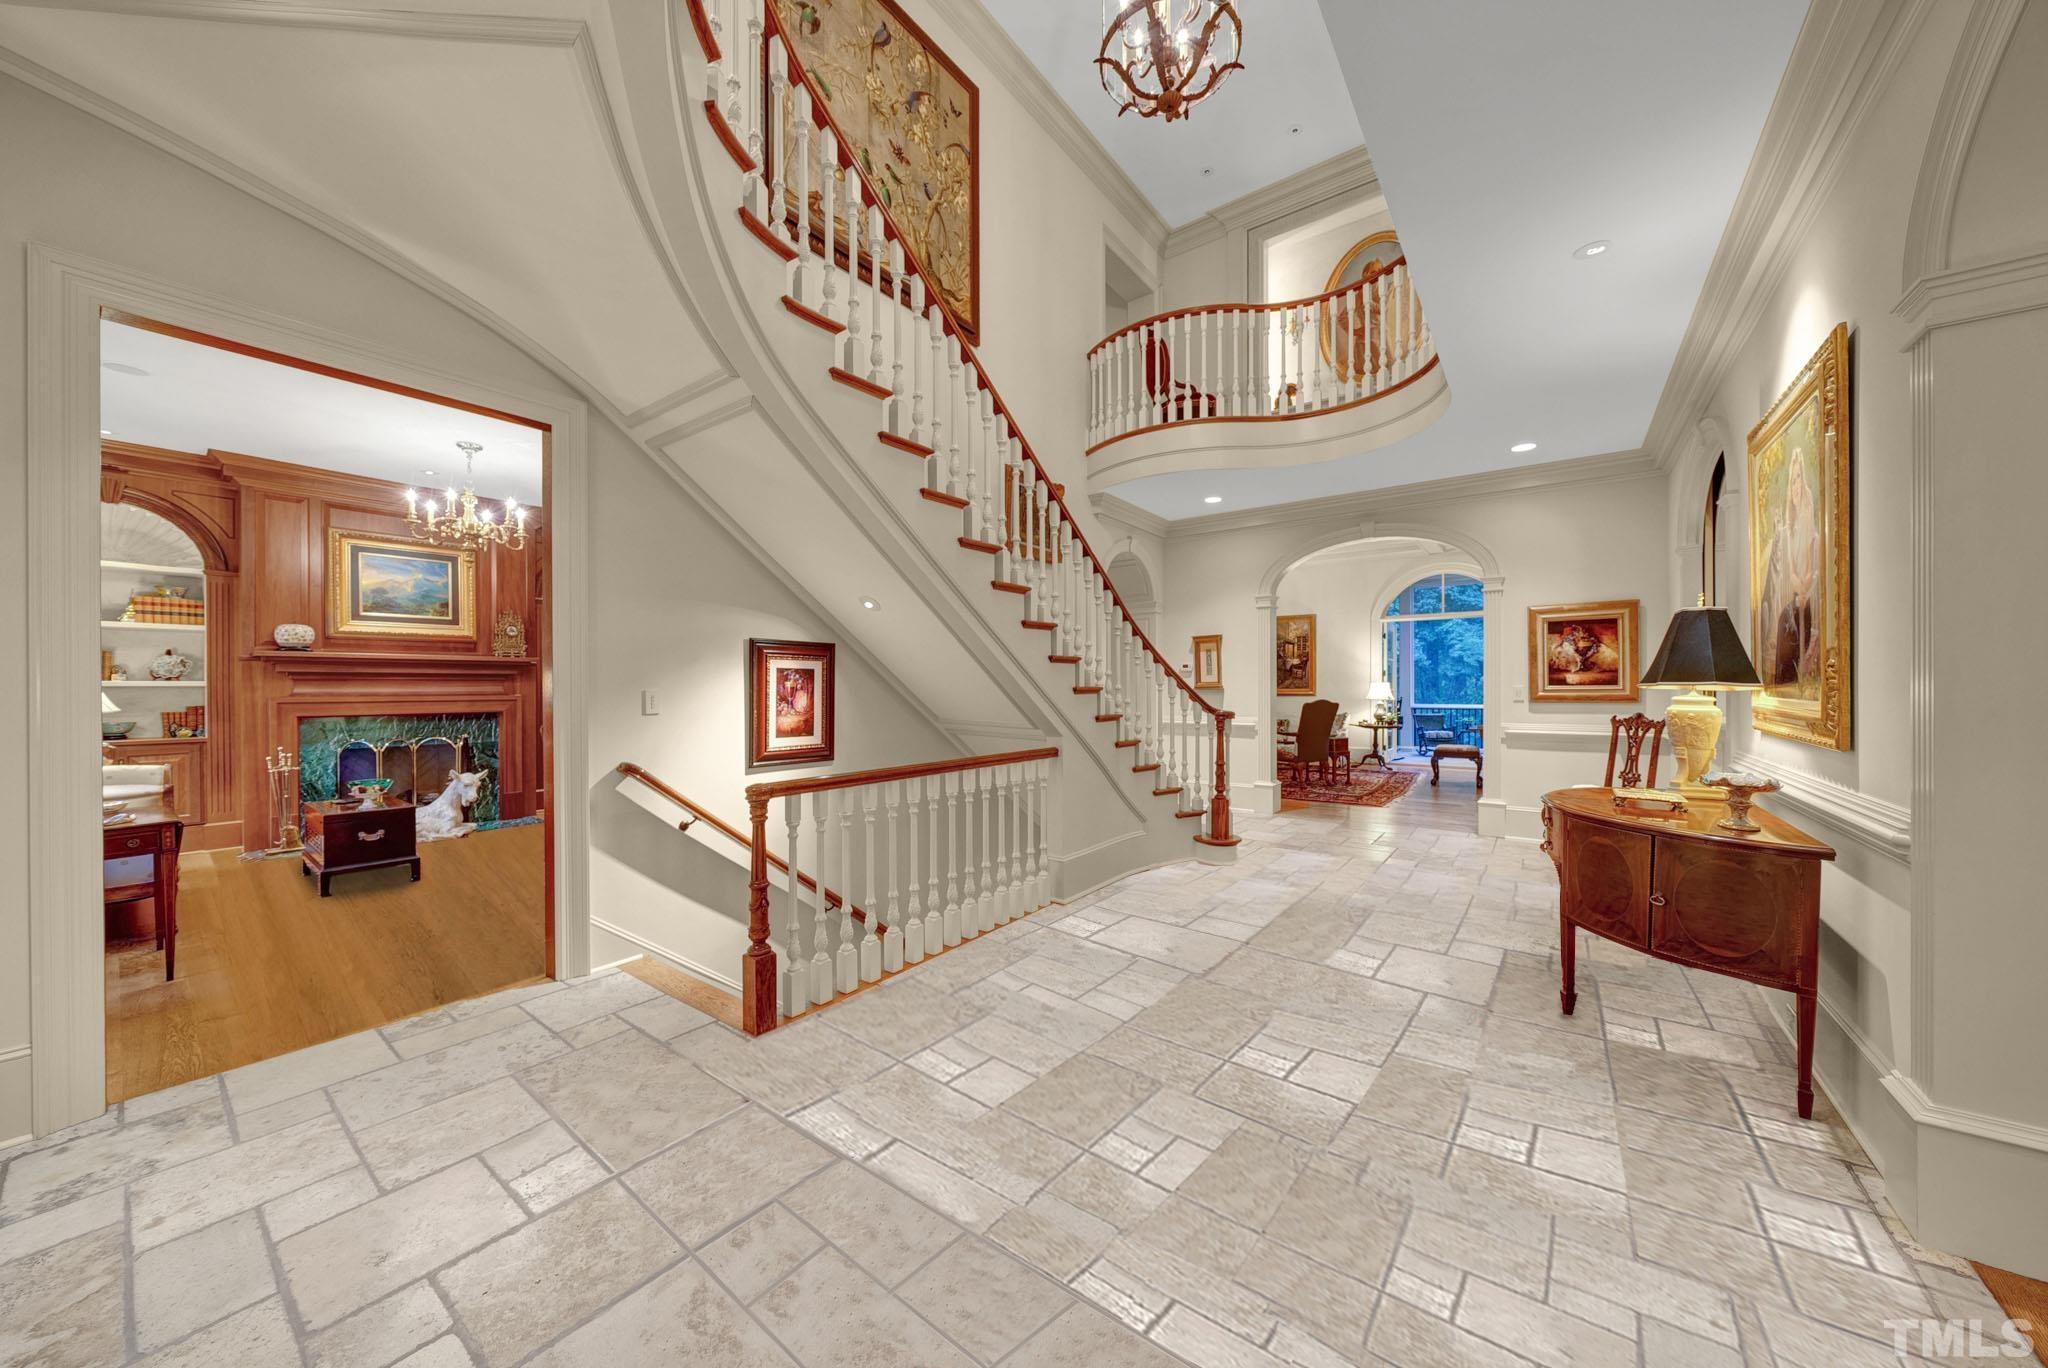 Gorgeous 2 story foyer w/traventine tile floors.  Custom carved balusters. This custom built home by John Rufty shows the quality of the house and attention to detail.